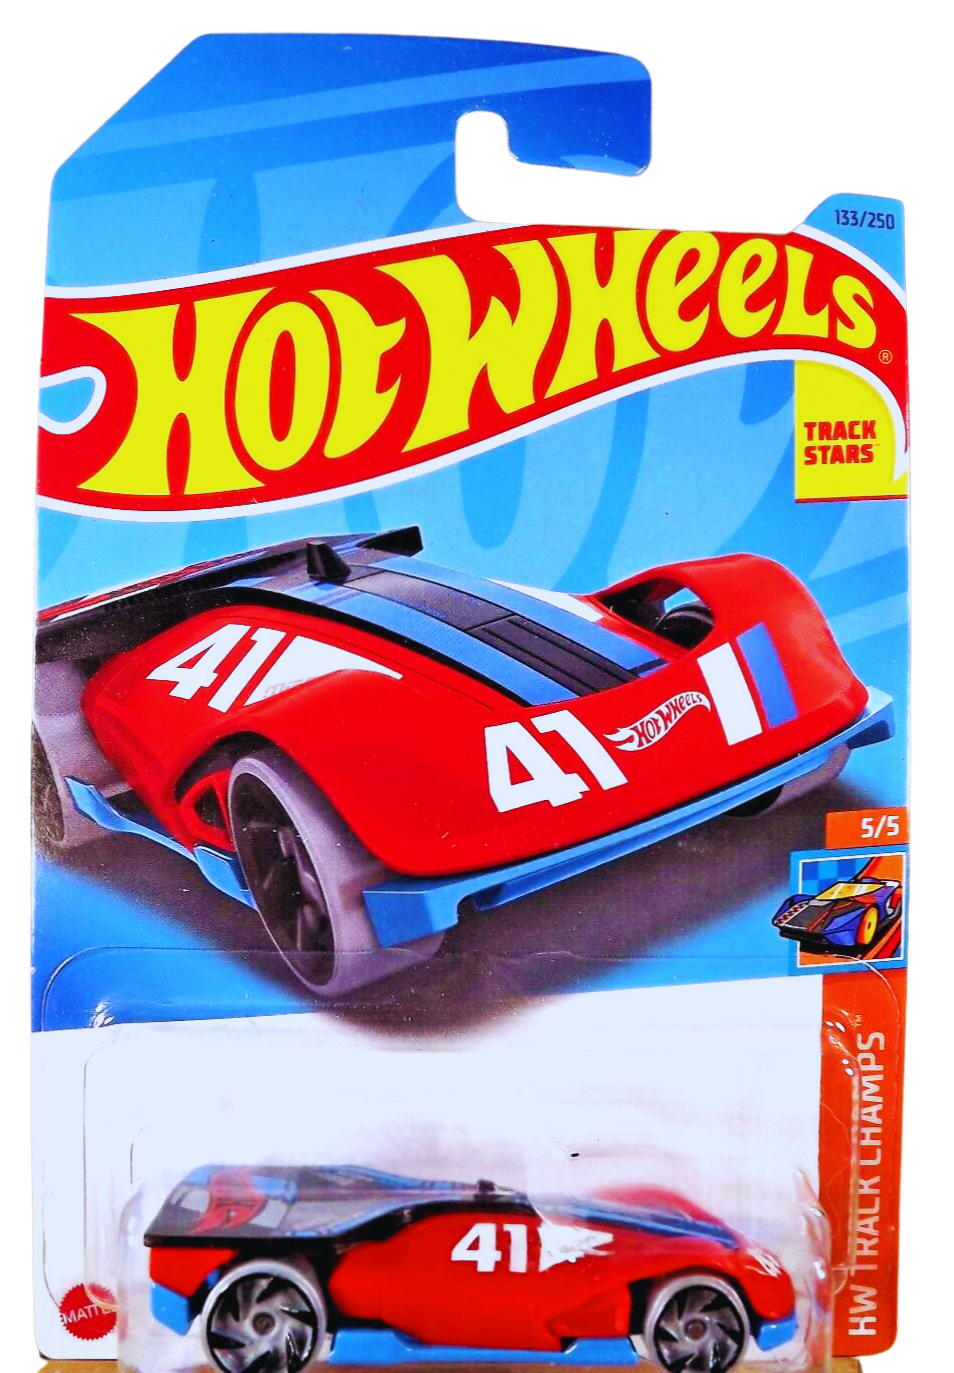 2023 Hot Wheels #133 HW Track Champs 5/5 ROLLIN' SOLO Red-Blue w/Black RA Spokes Maple and Mangoes